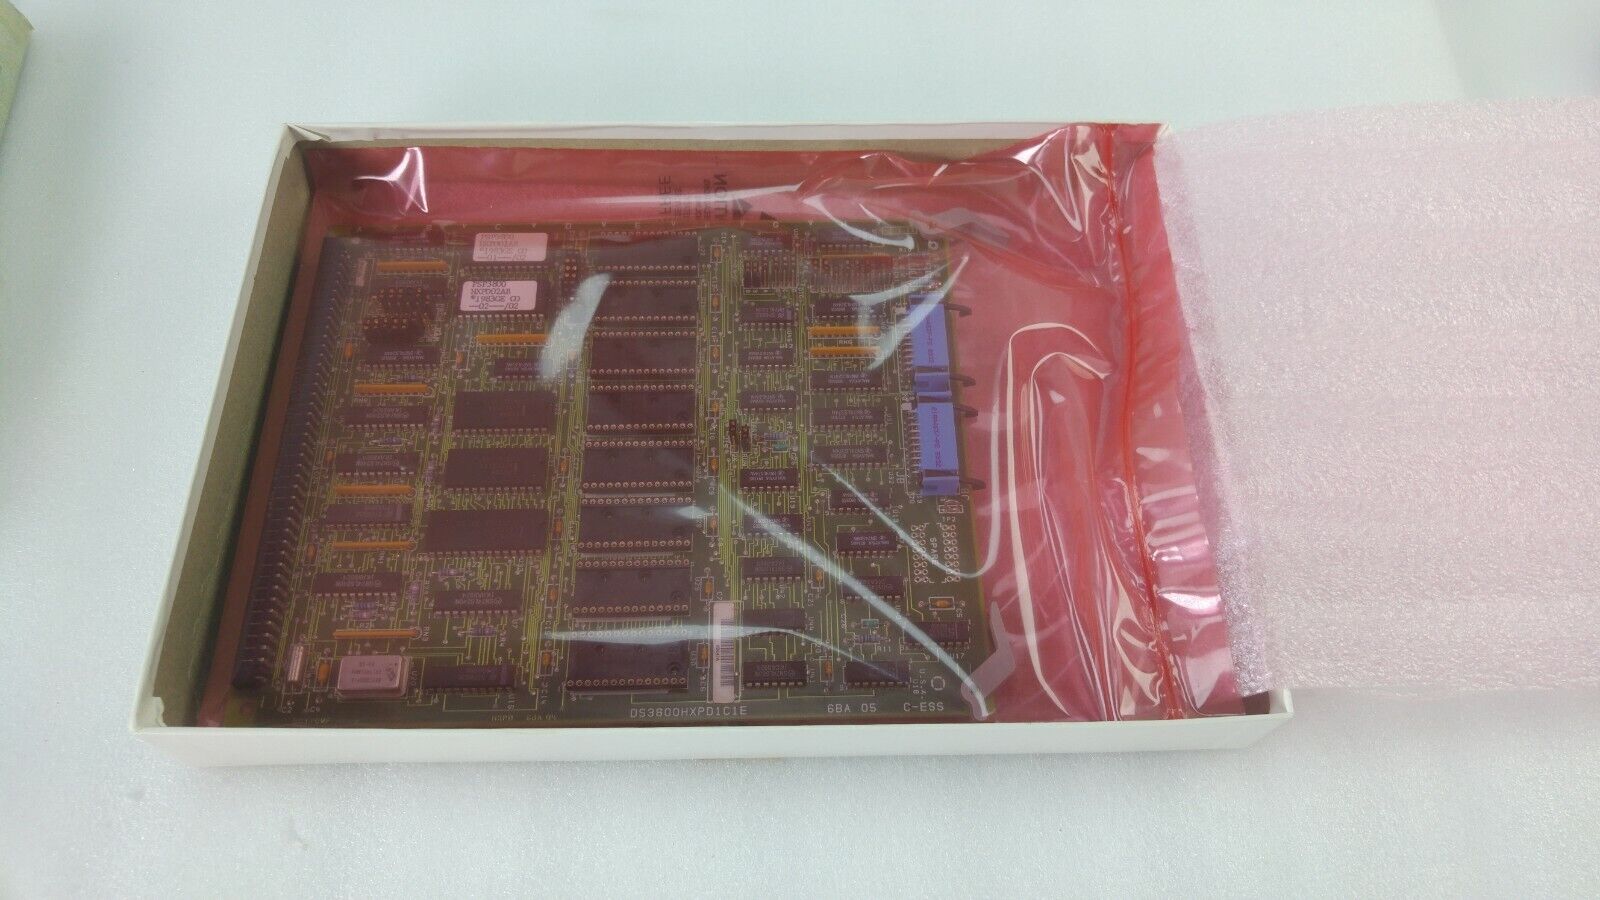 DS3800HXPD | General Electric Microprocessor Expander Board